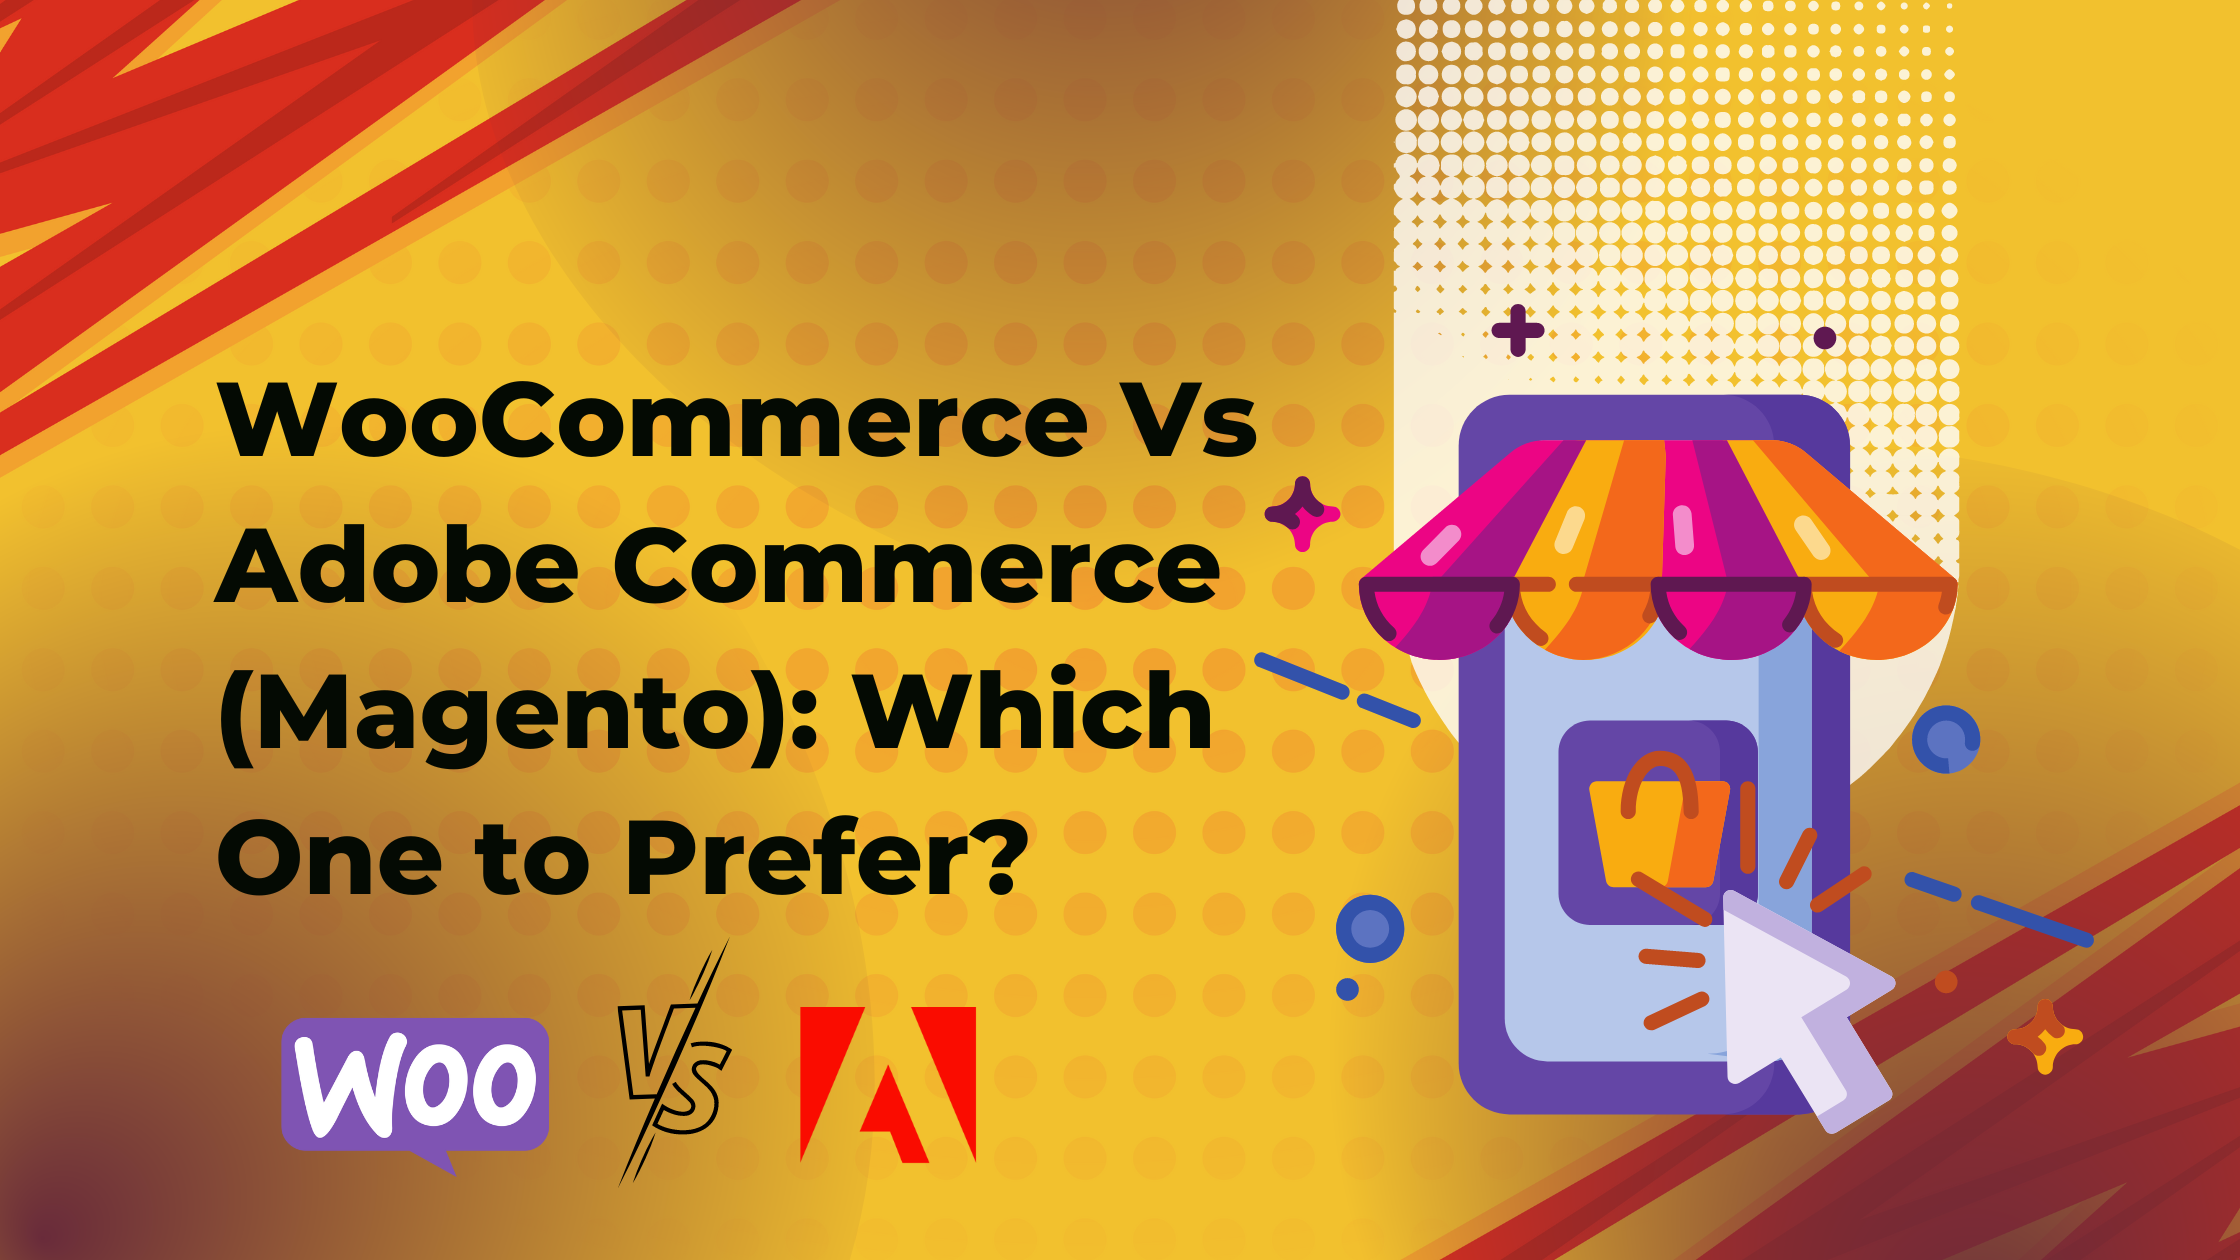 WooCommerce Vs Adobe Commerce (Magento) Which One to Prefer